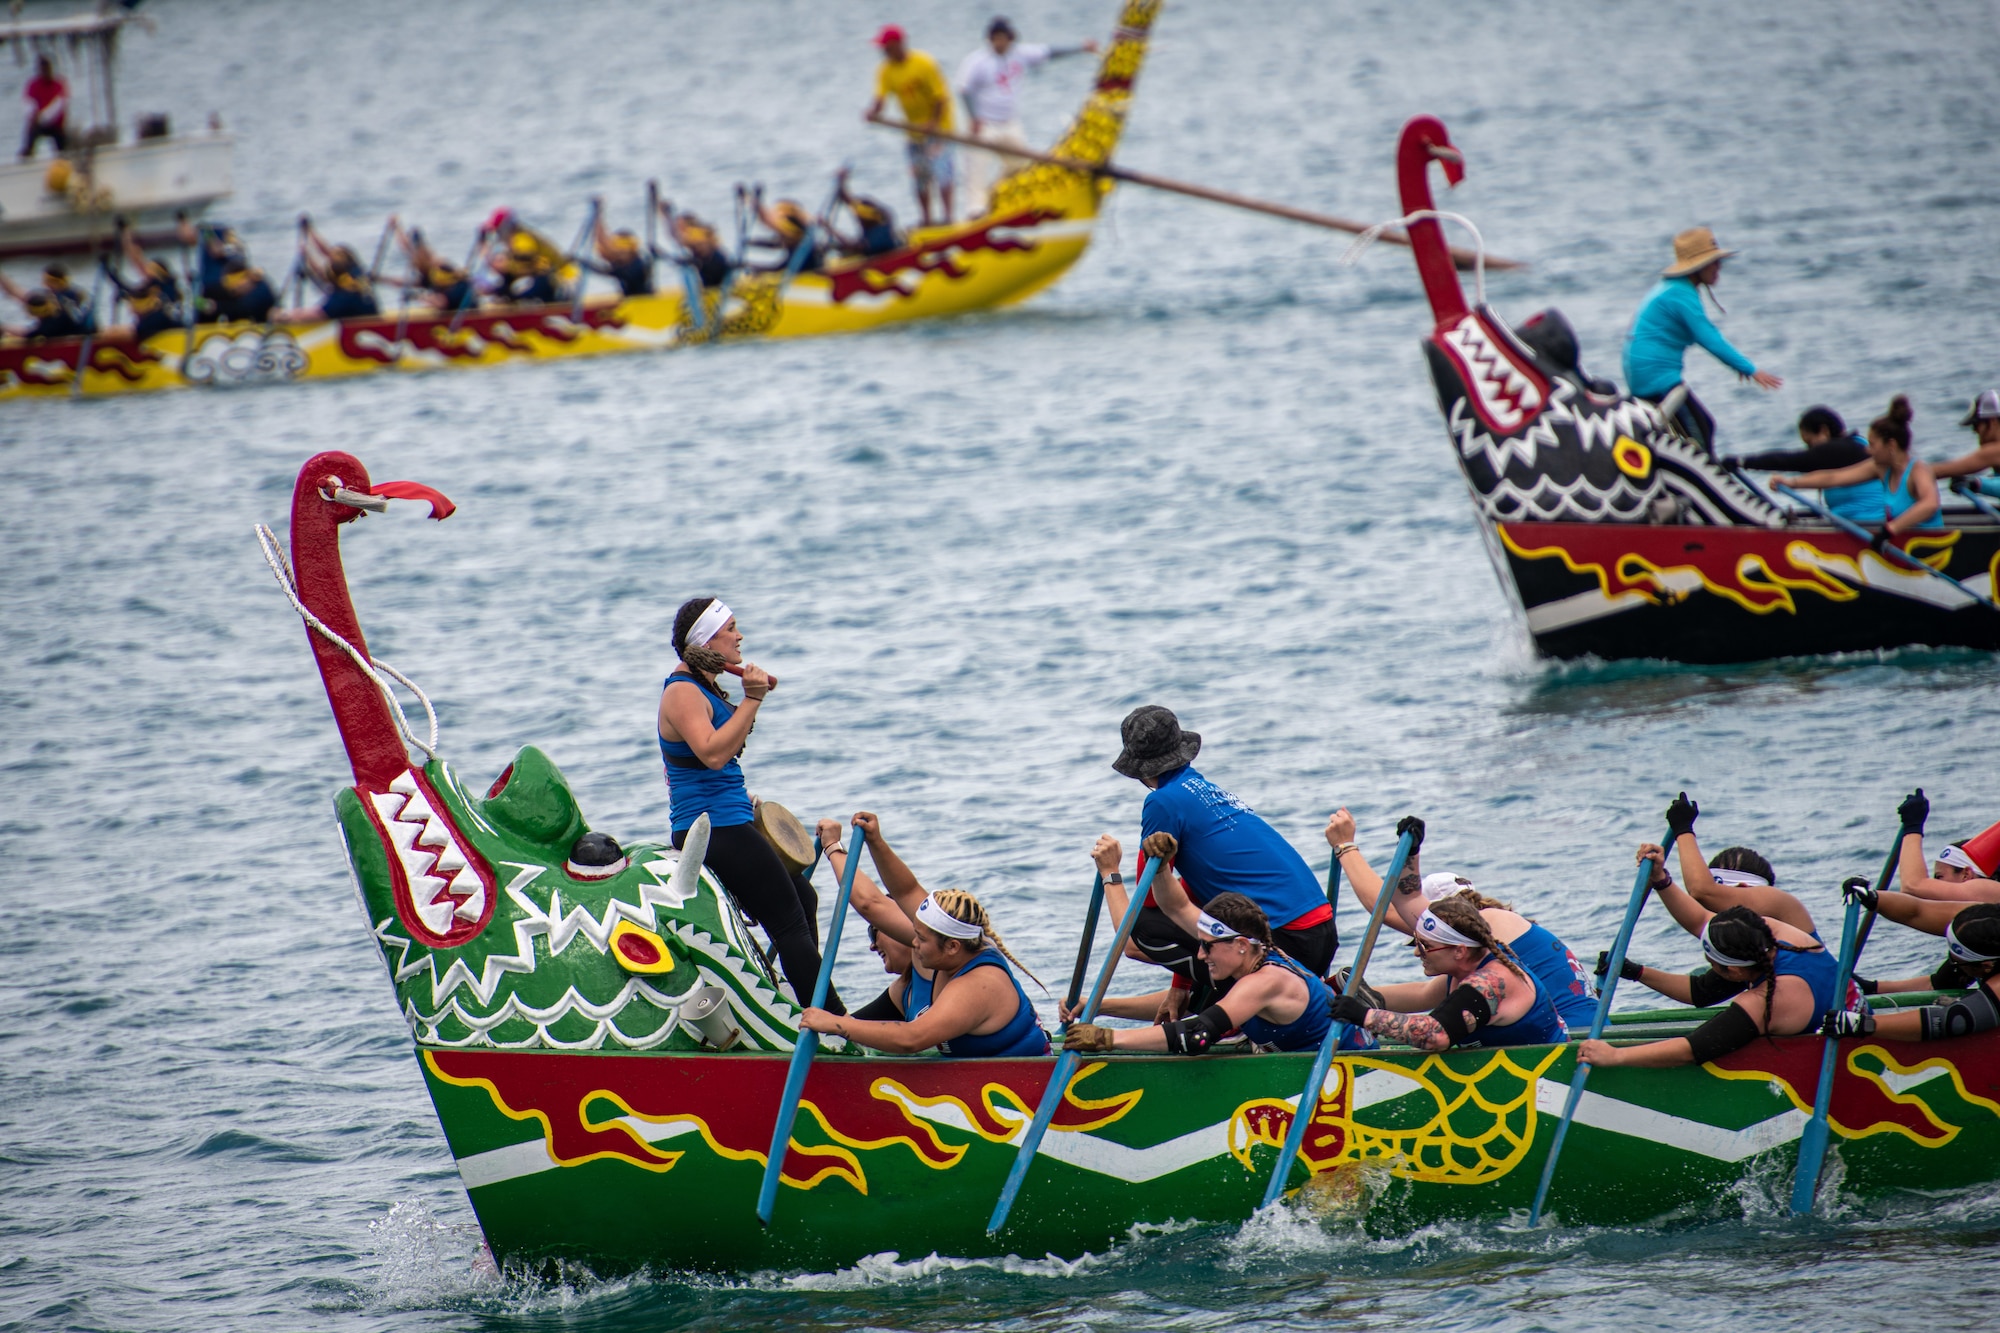 Kadena Air Base’s Shogun Women, the U.S. Navy’s Nirai Kanai Women and the Sabani Soul Sisters boat race teams compete in the 2023 Naha Hari Dragon Boat Races in Naha City, Japan, May 5, 2023. The races marked the culmination of months of training by U.S. and Japanese teams from across Okinawa. (U.S. Air Force photo by Lt. Col. Raymond Geoffroy)